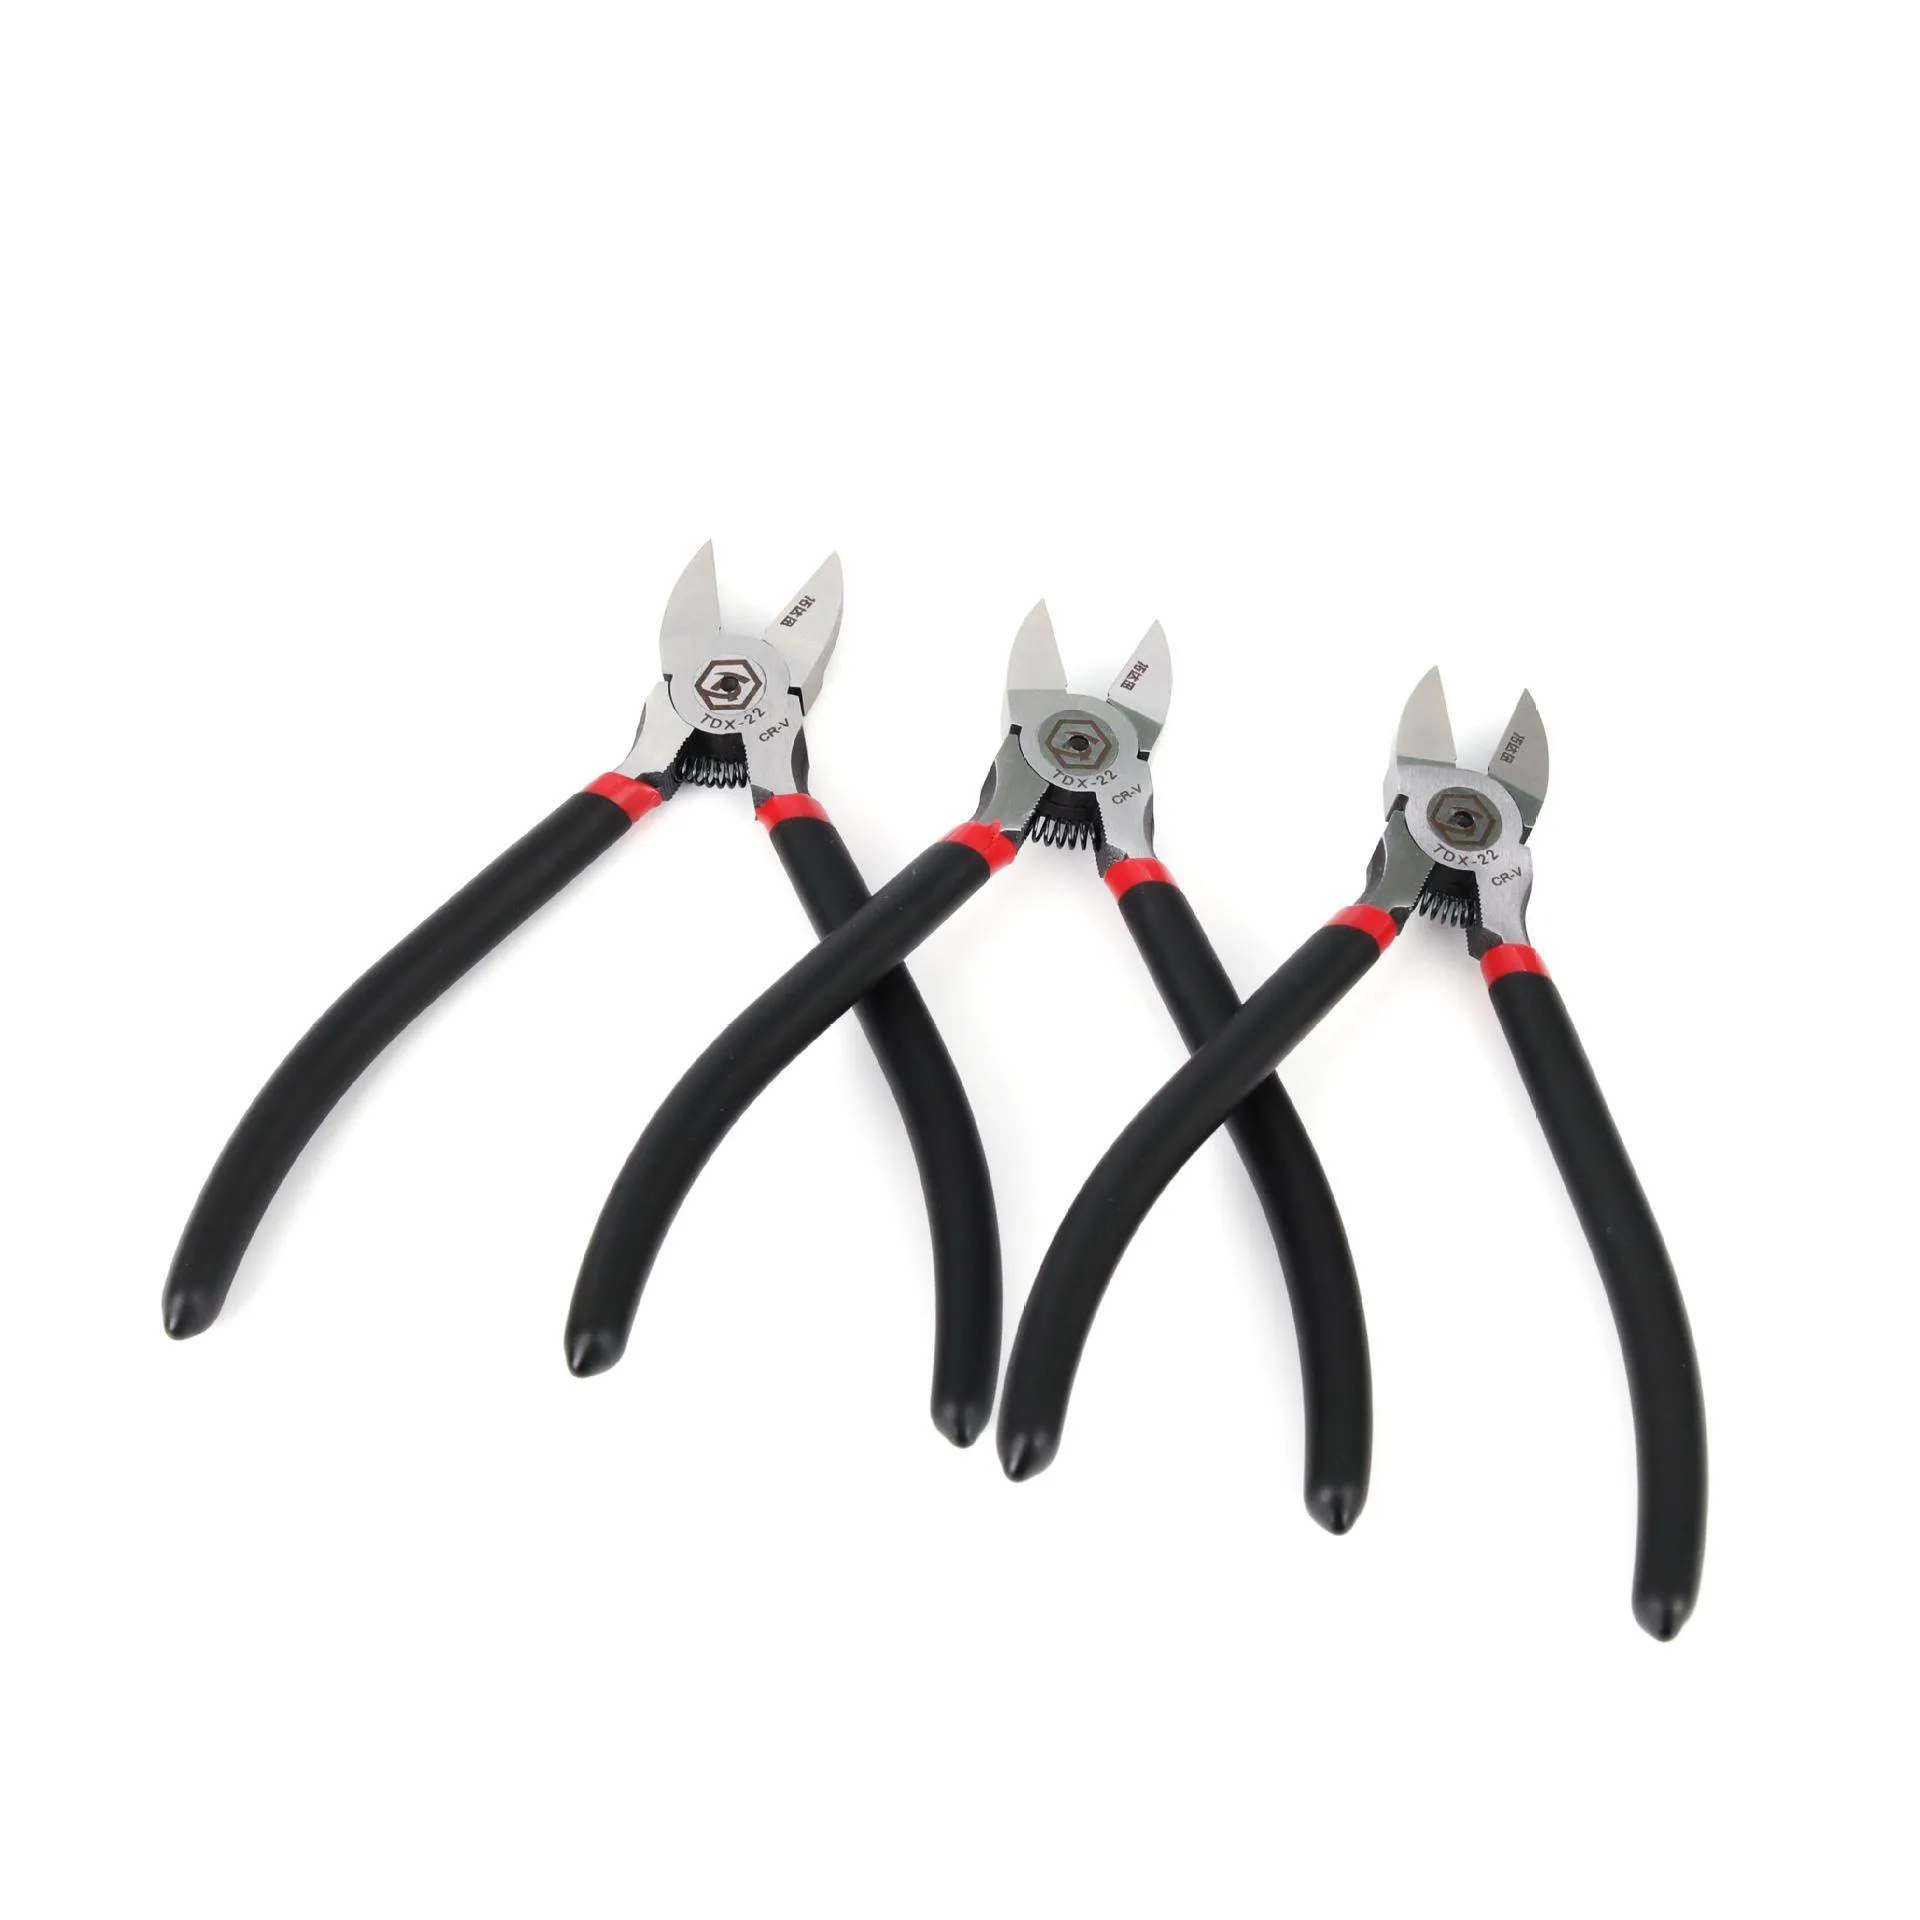 Pliers 6 Inch Thin And Thick 55 Steel Chromium Vanadium Cr-V Electric Tool Industrial Grade High Carbon Electronic Pliers With Drop De Ottn9